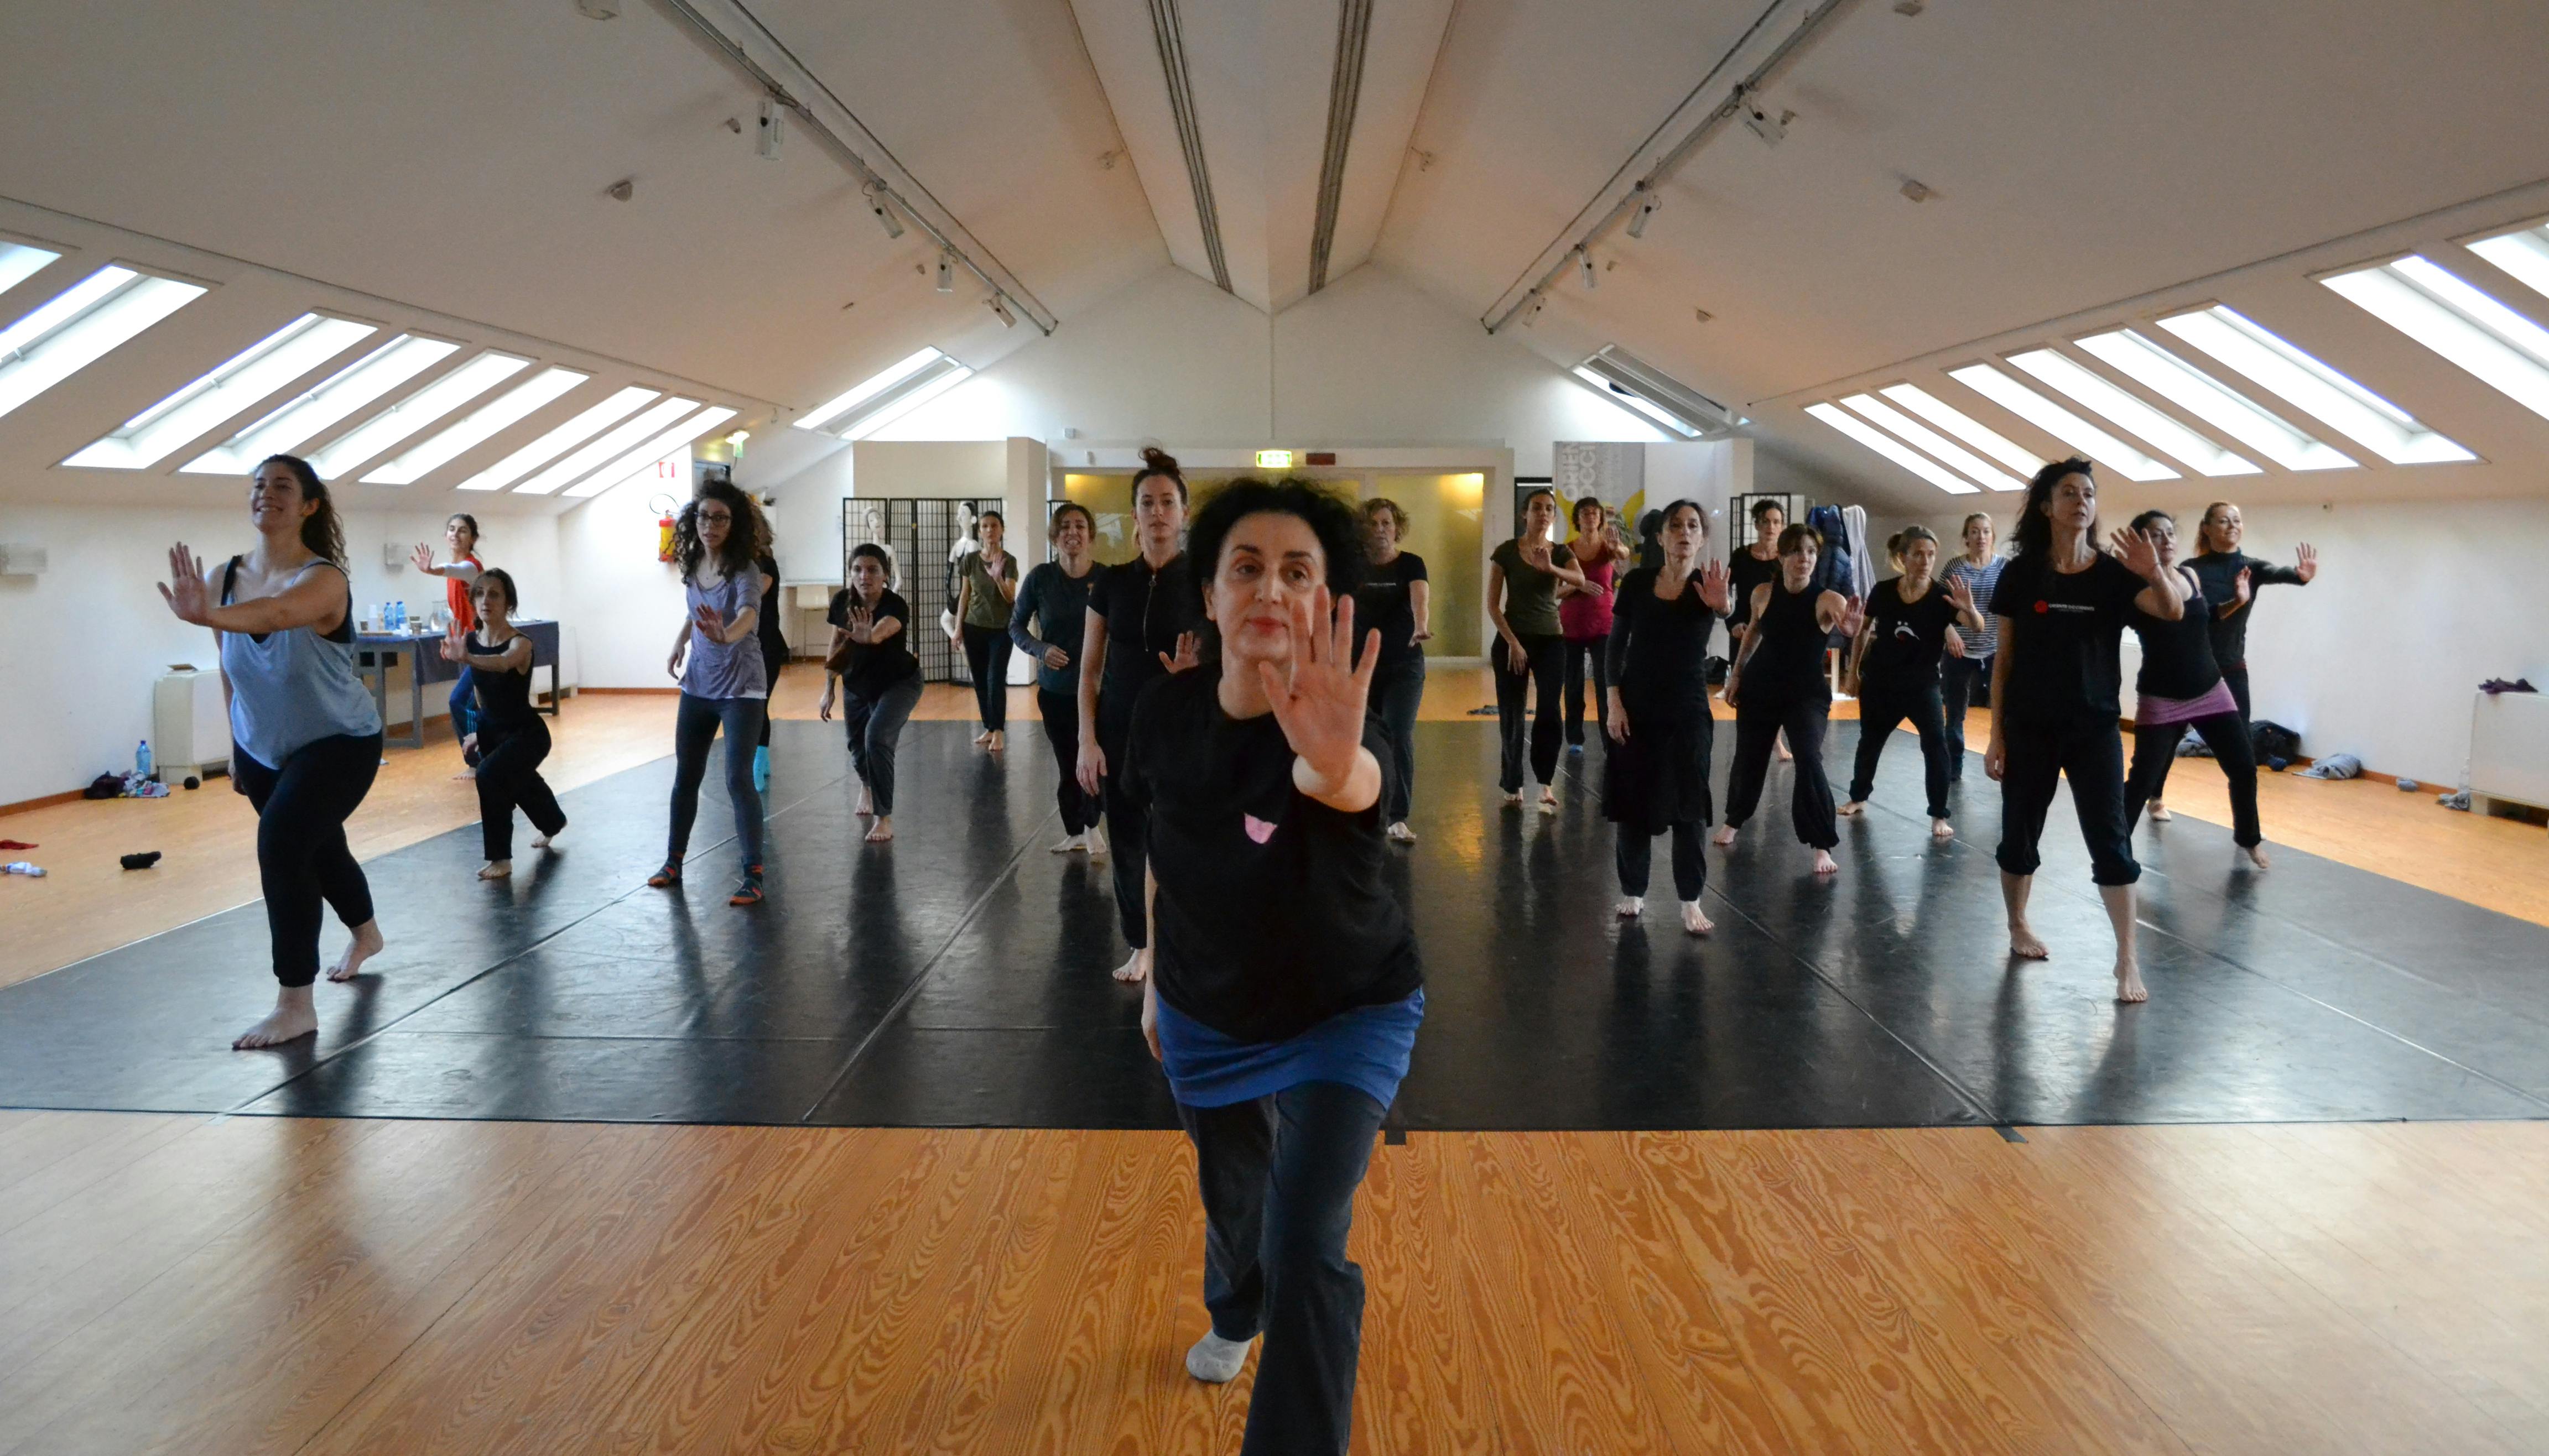 Group of people, with the teacher in the front row, during a dance class intensive level